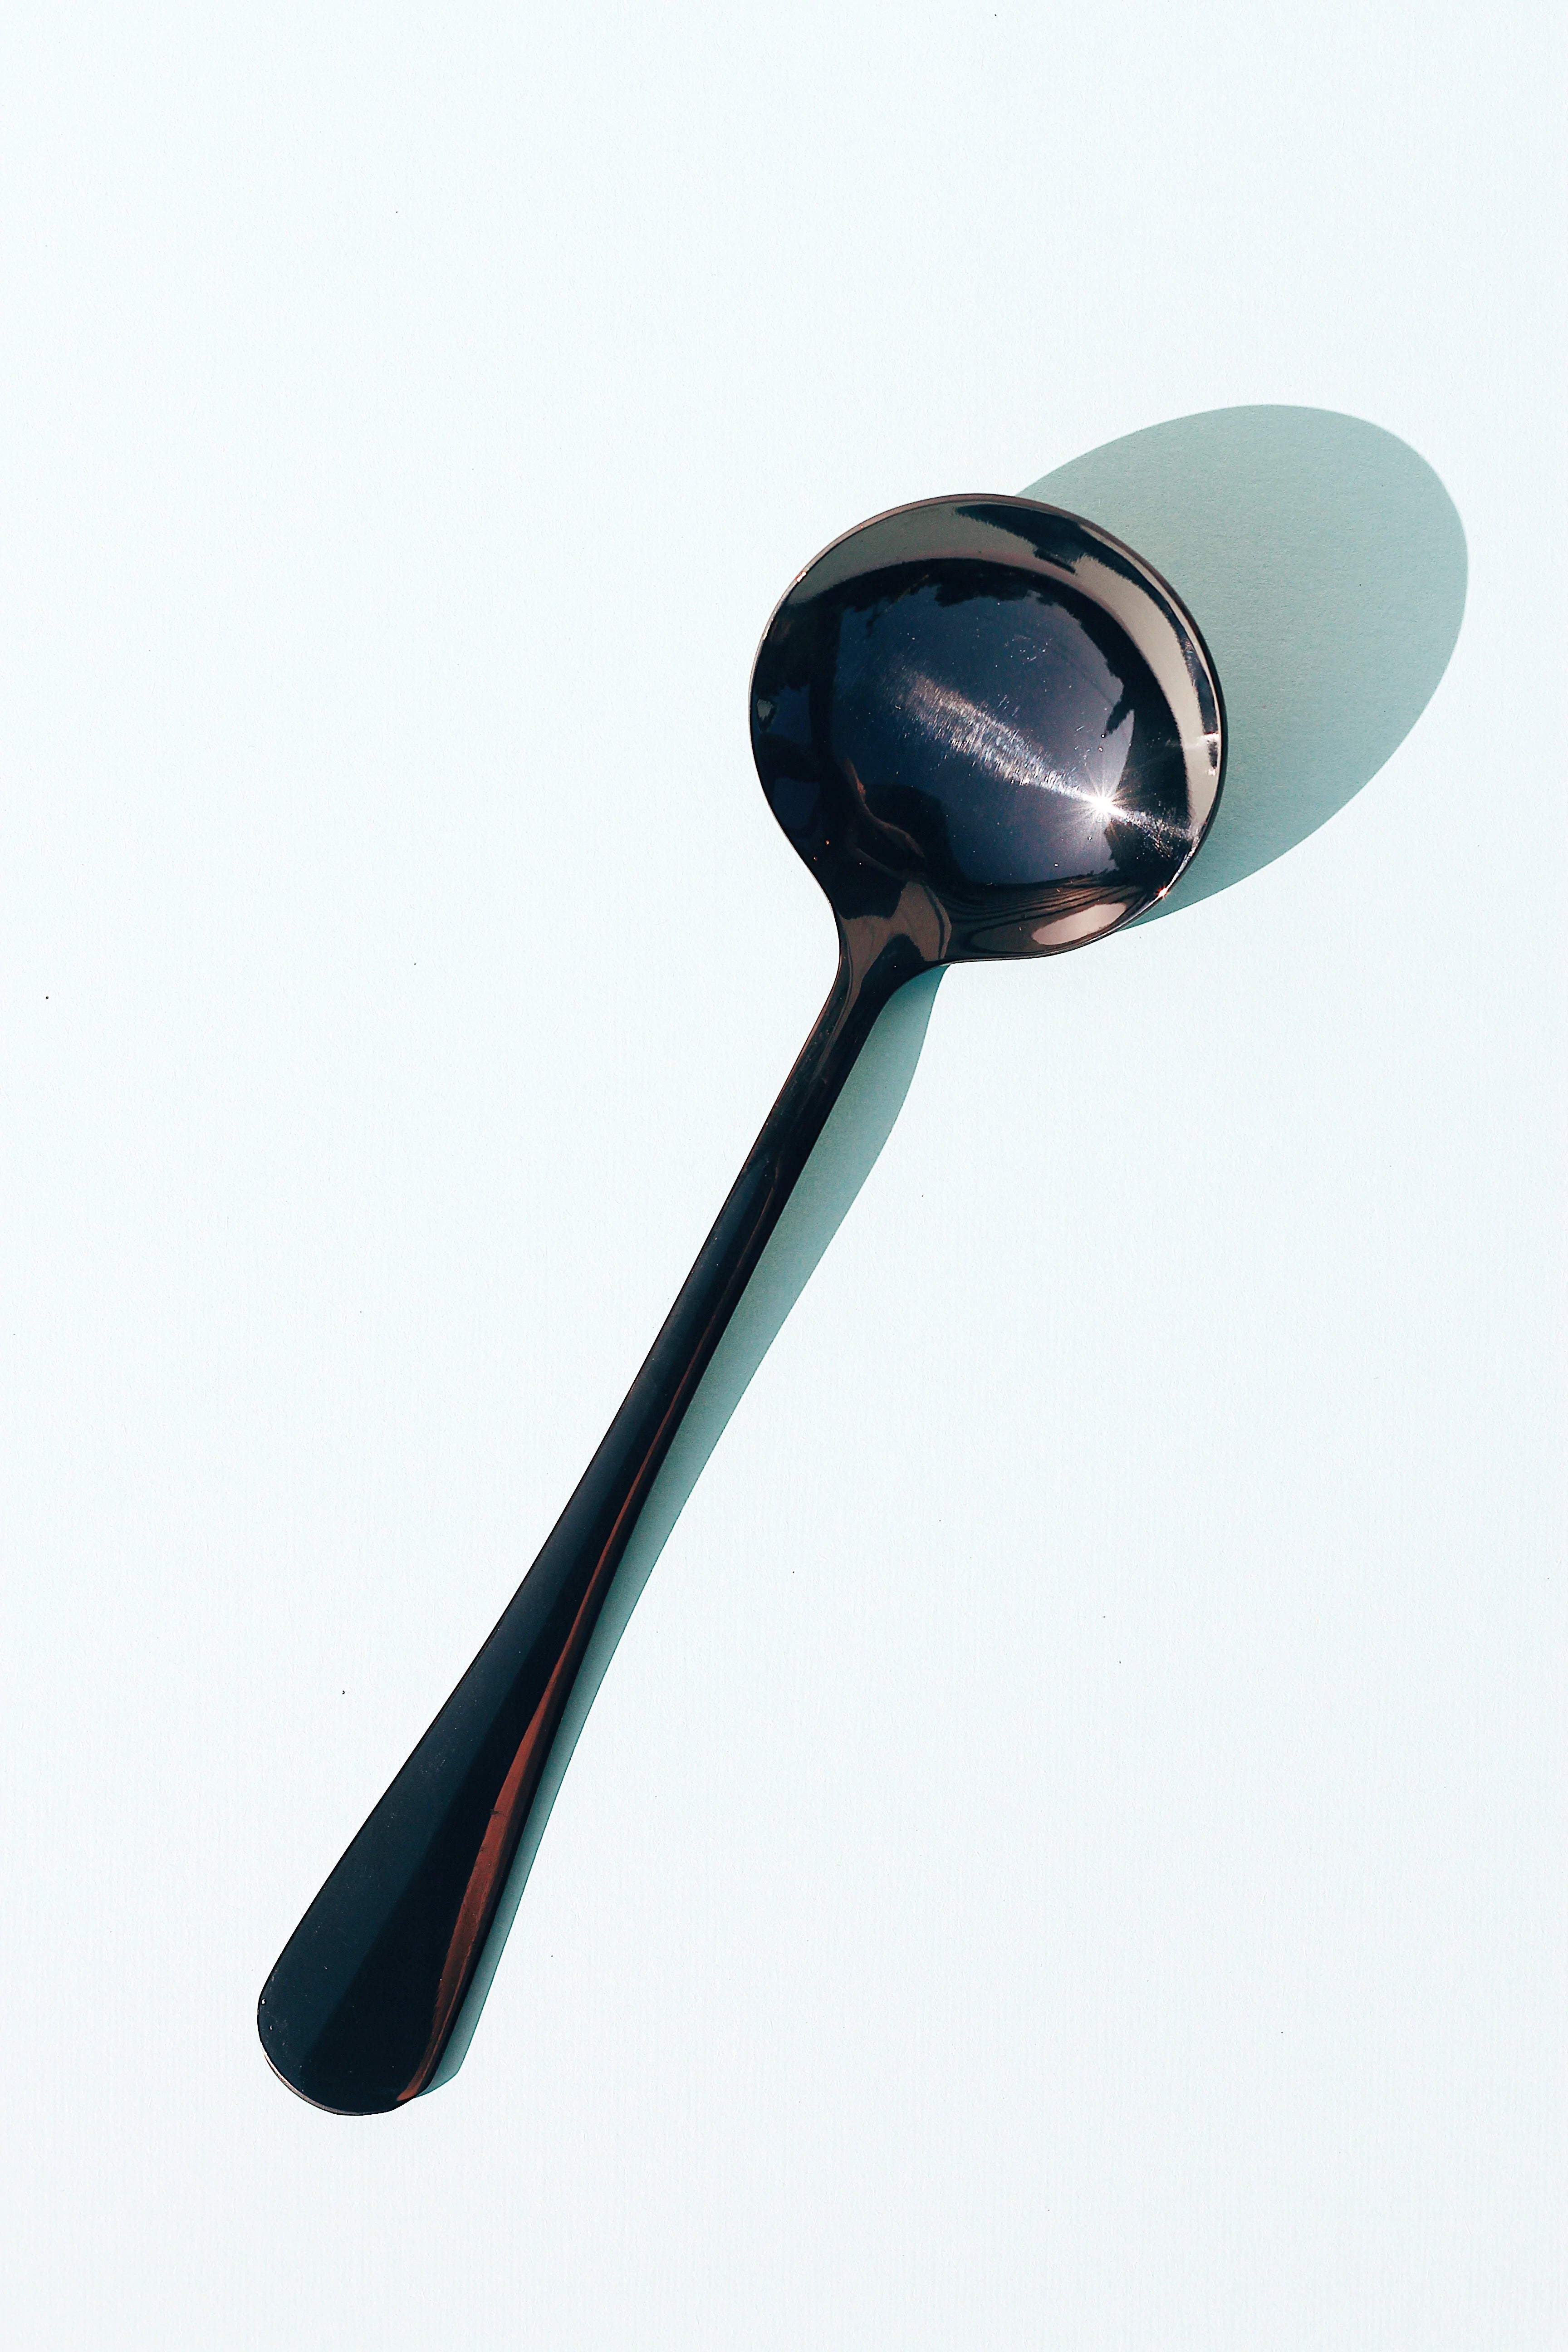 The Big Dipper: Goth Black  Umeshiso Cupping Spoon by Bean & Bean